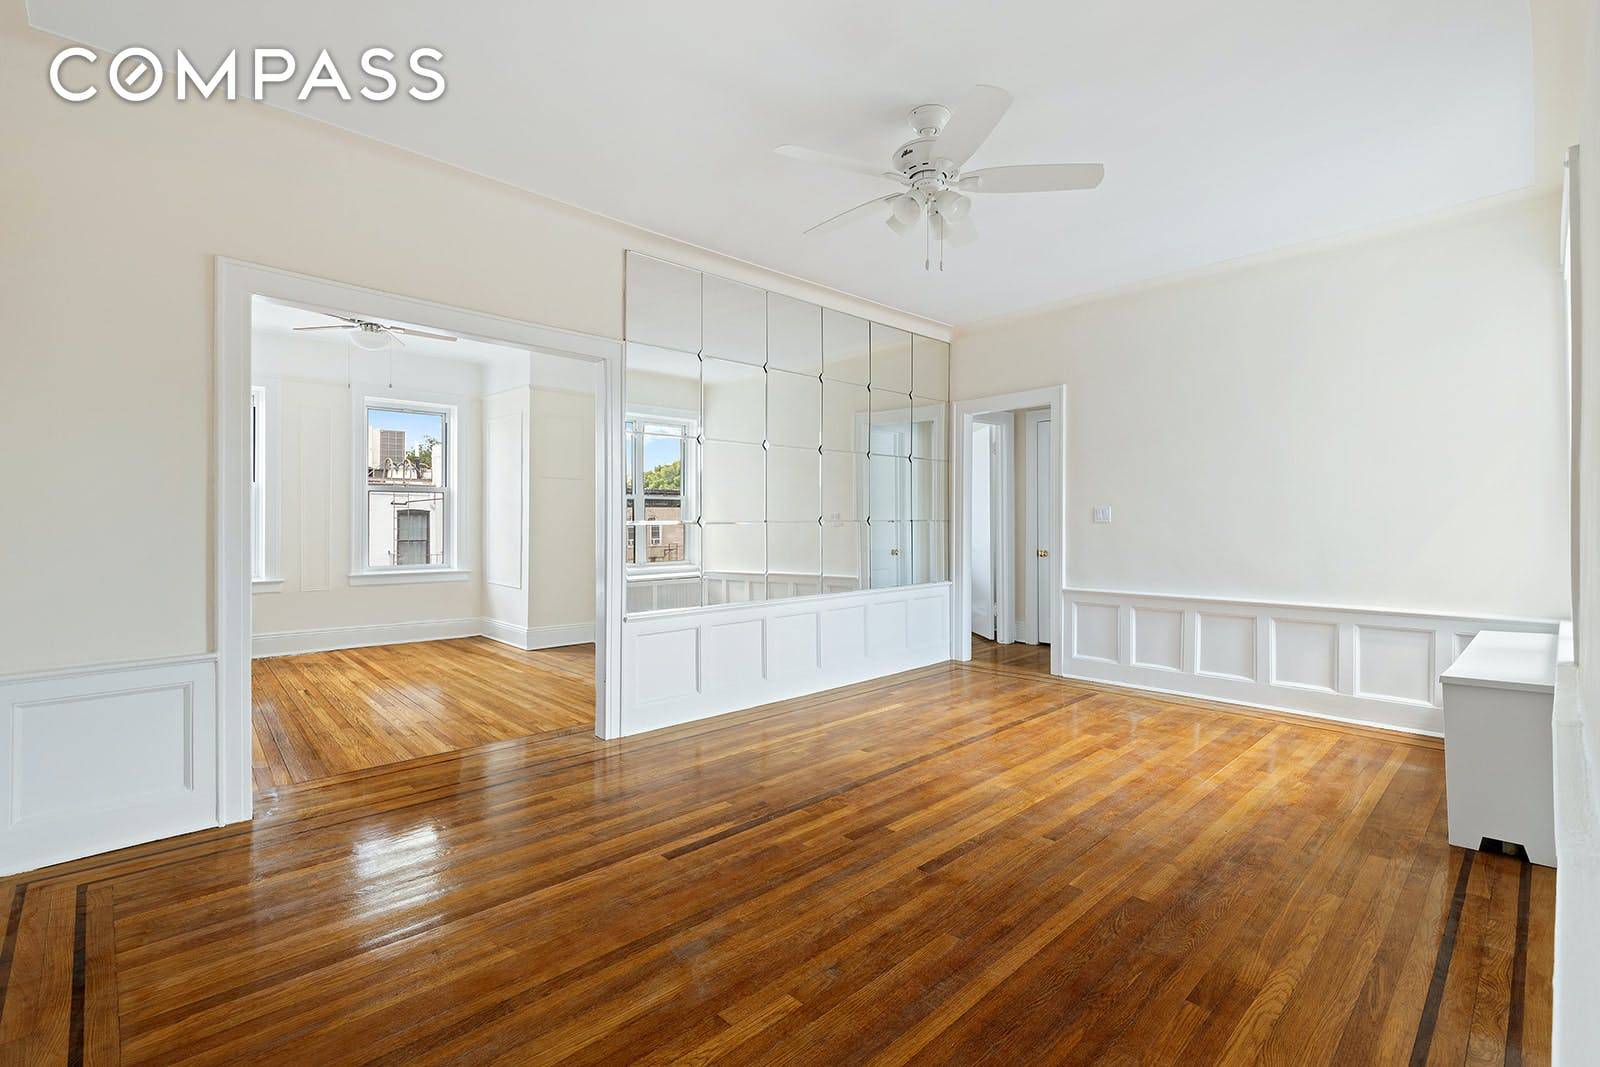 Welcome to Apt 3R at 521 16th Street, a 2 bed, 1 bath apartment at the top of a quiet, pre war building just one street away from leafy Prospect ...